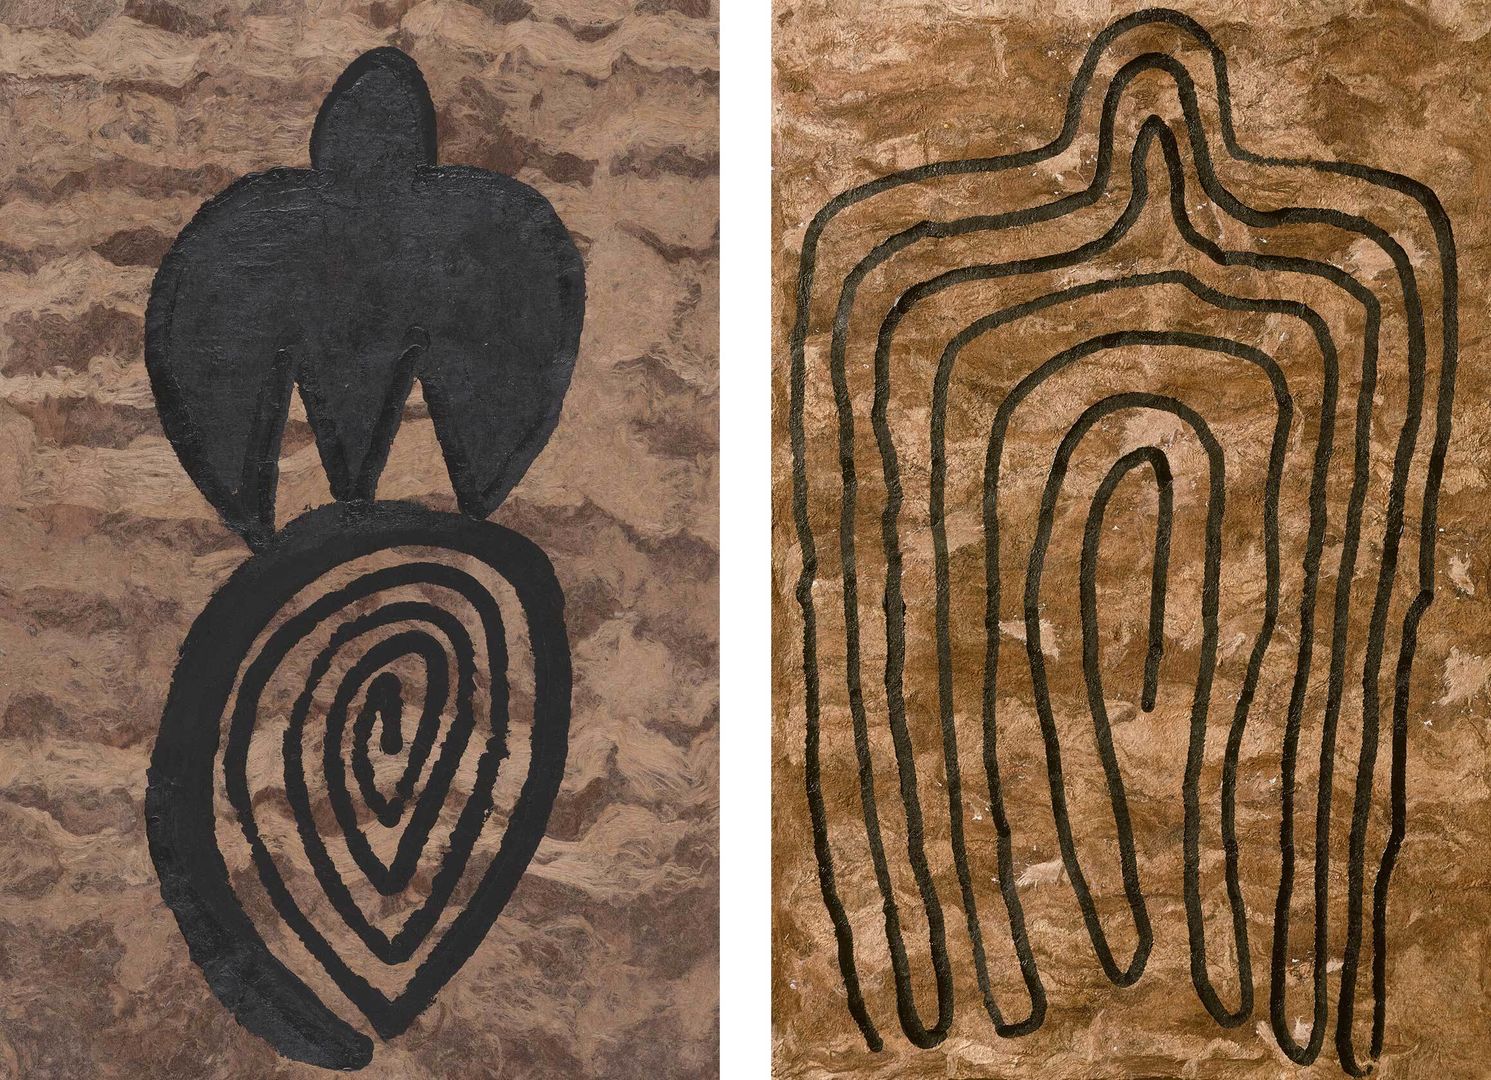 Two works by Ana Mendieta depicting pictographs resembling humanoid figures